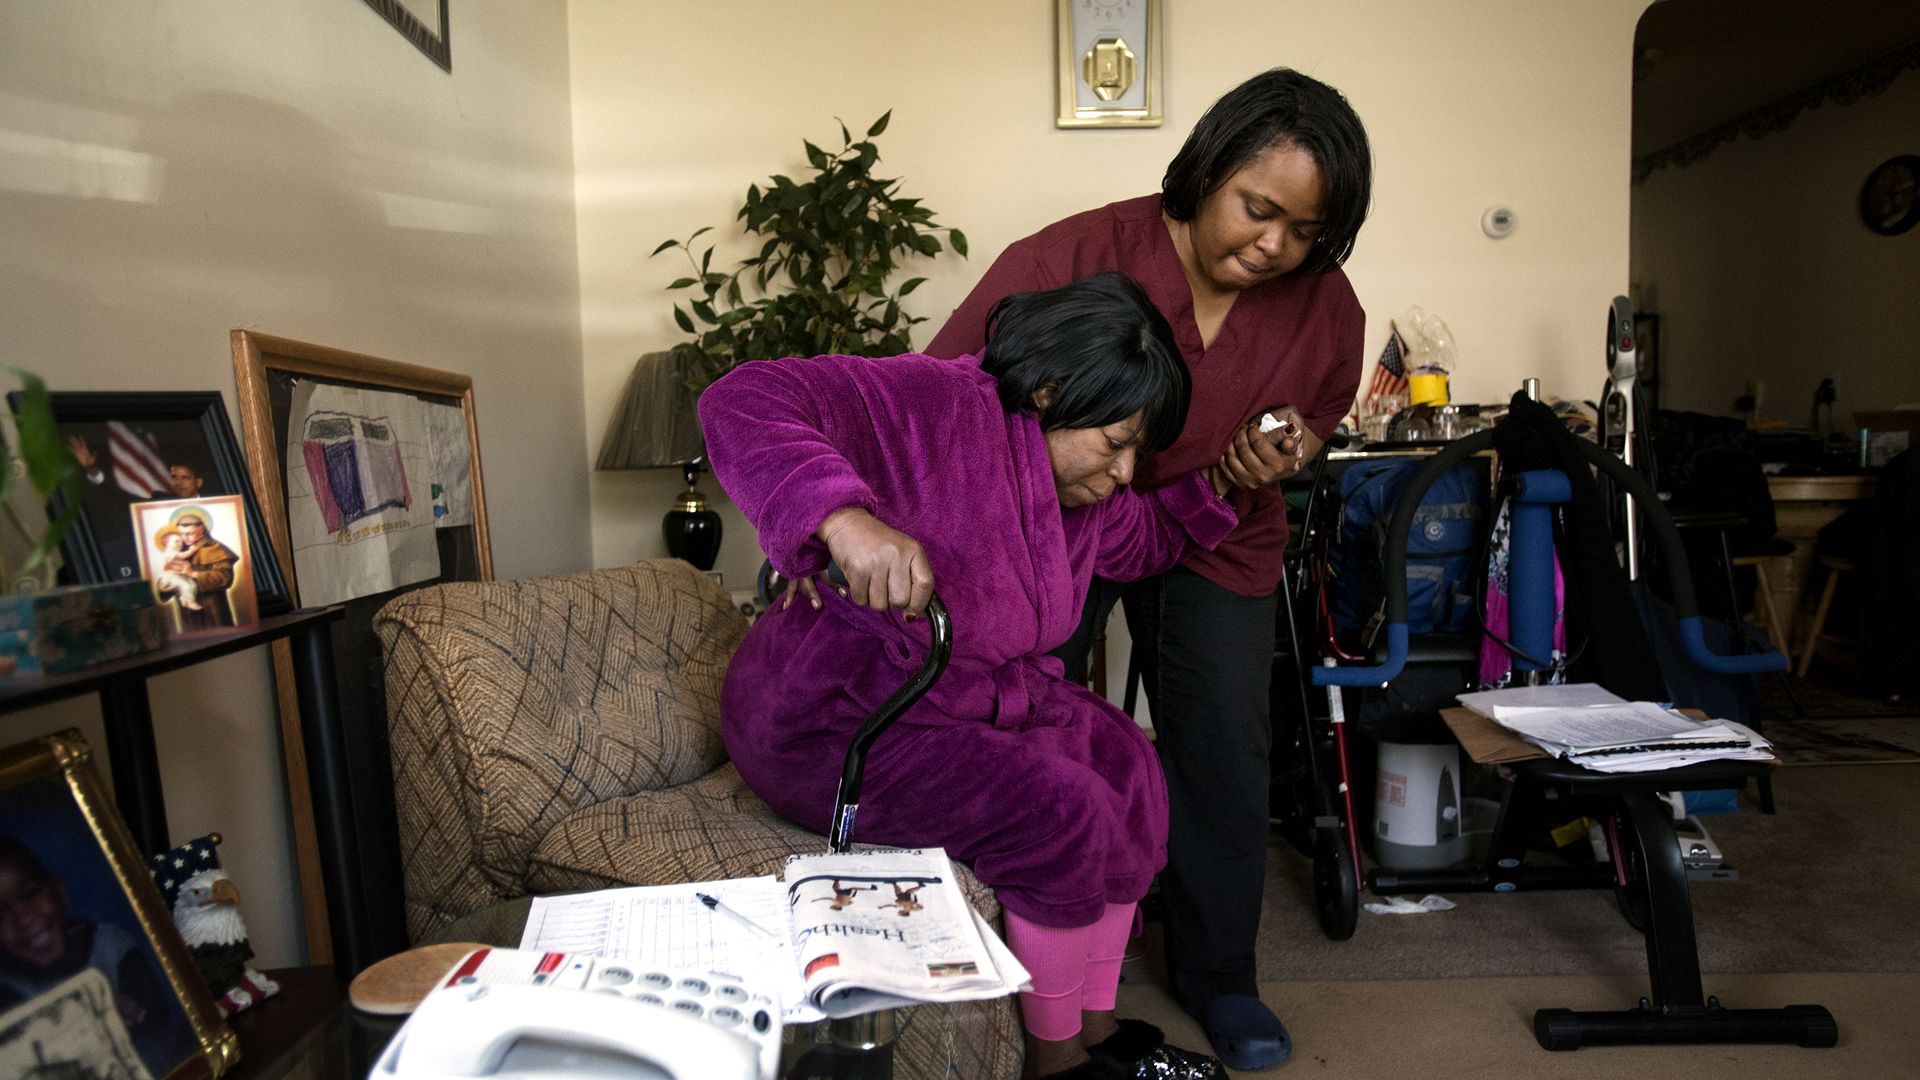 A home health aide helps a patient at her house.